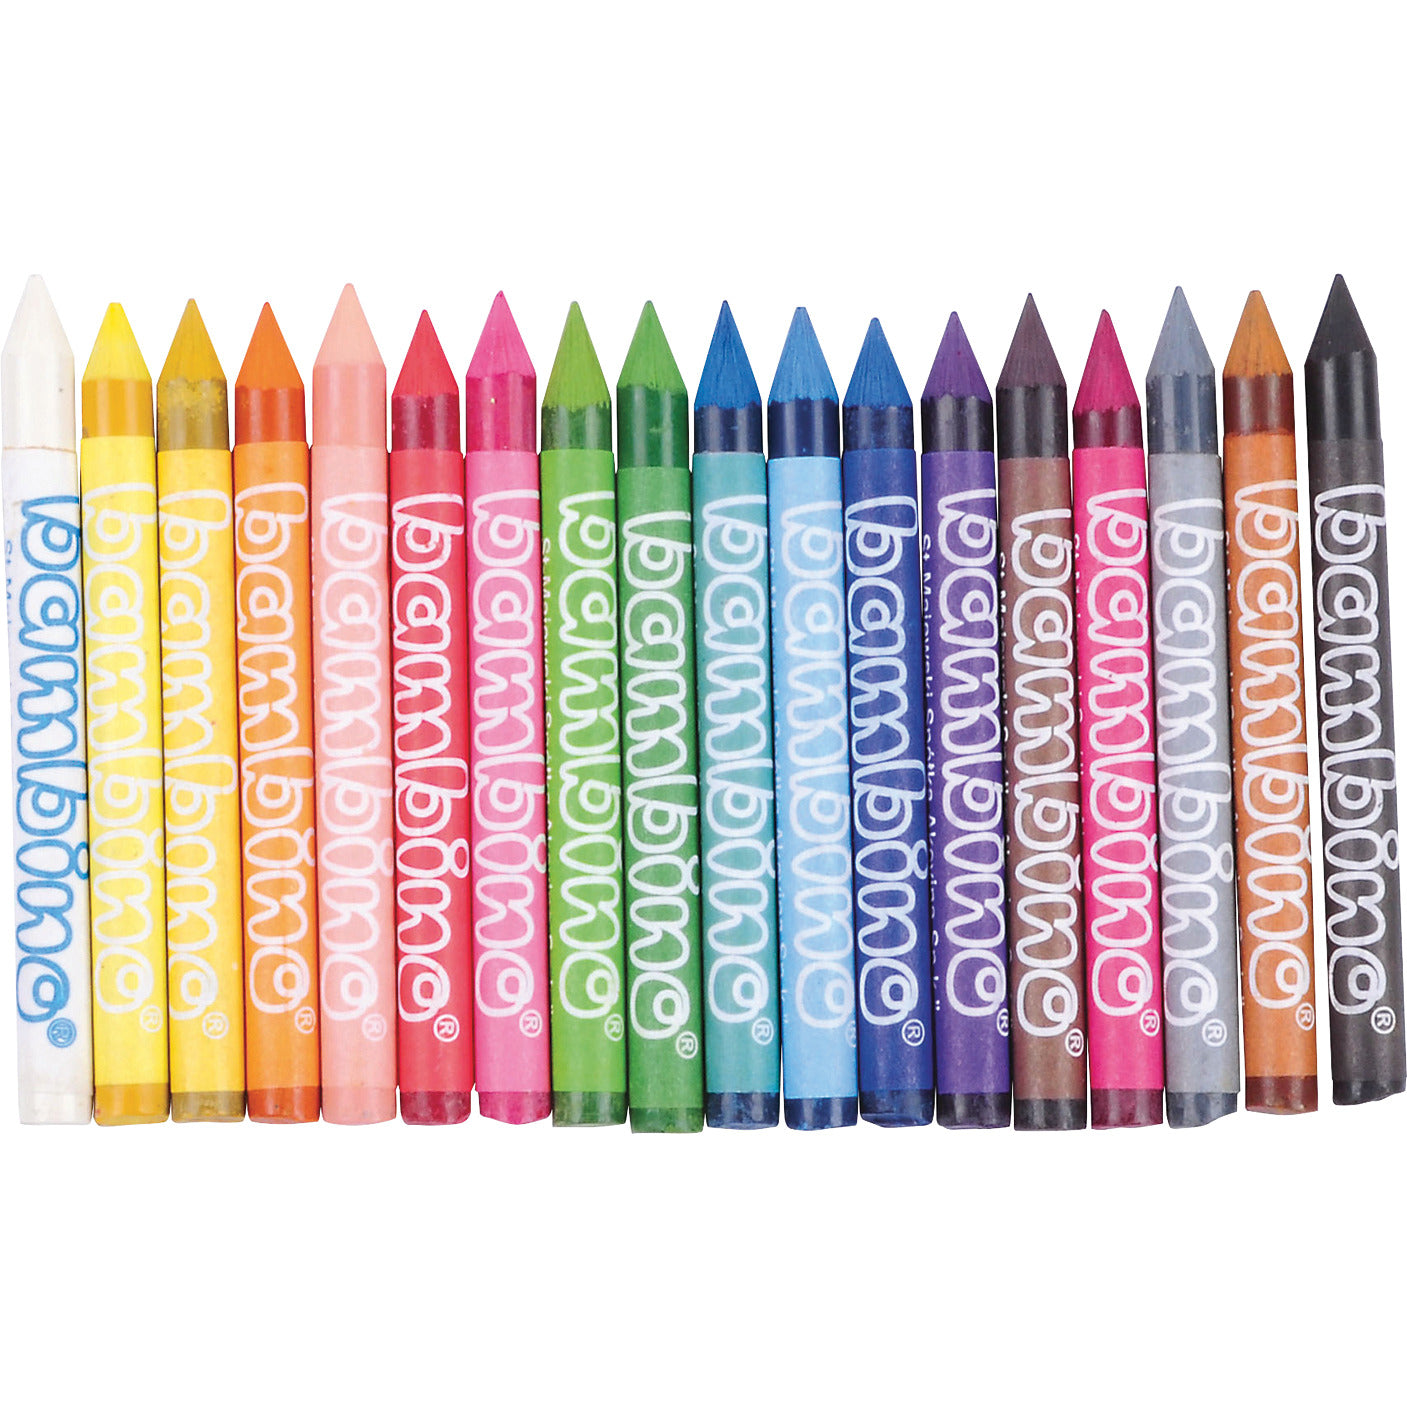 Bambino Coloring Crayons — Little Sprig Stories